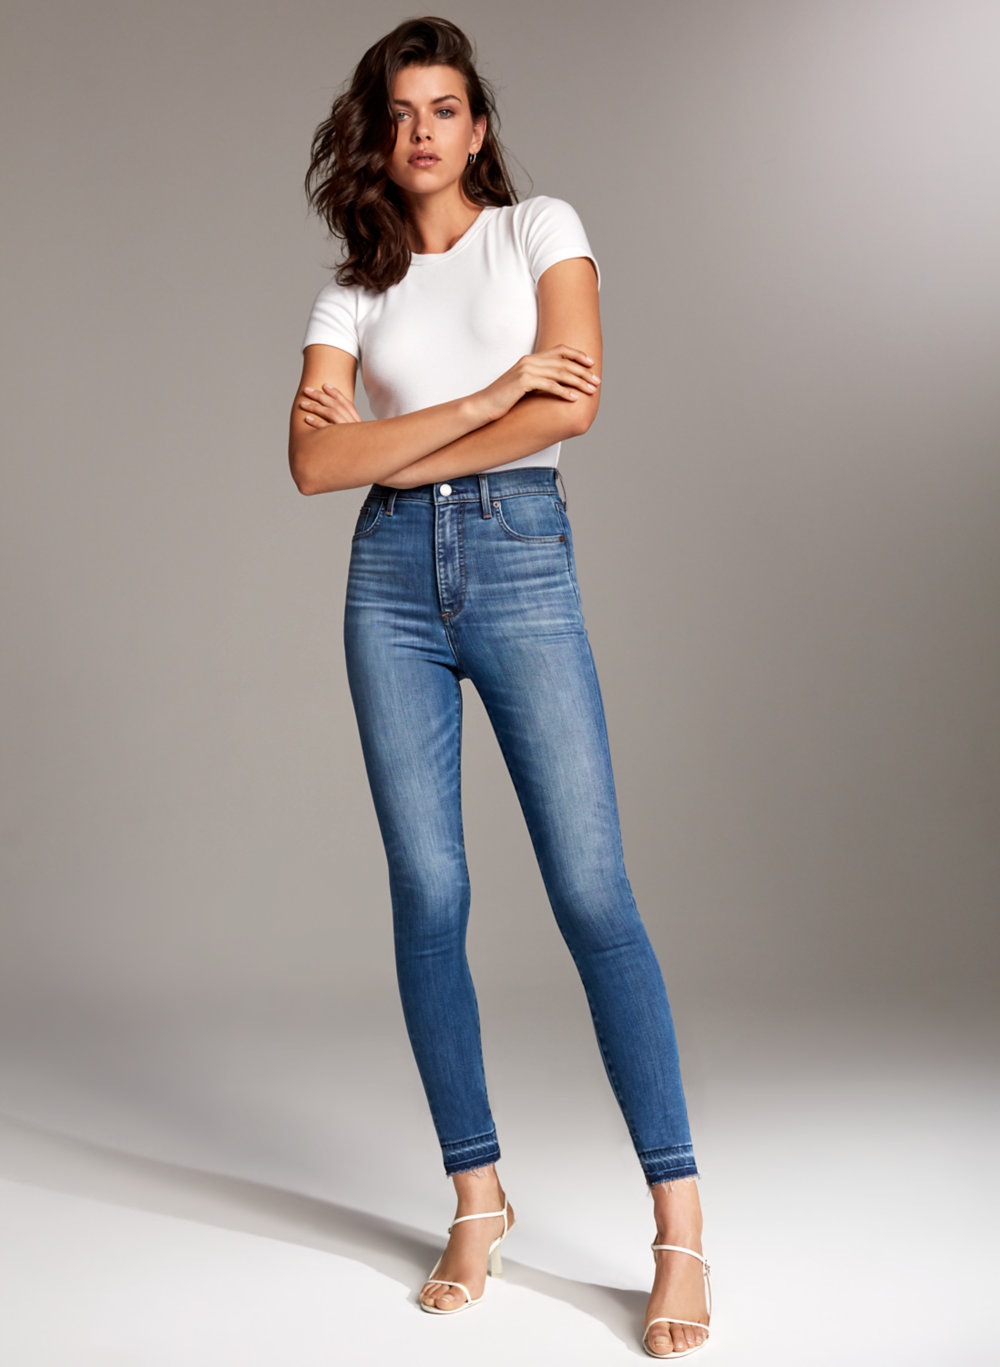 Lola Jeans Womens High Rise Straight Crop Jeans